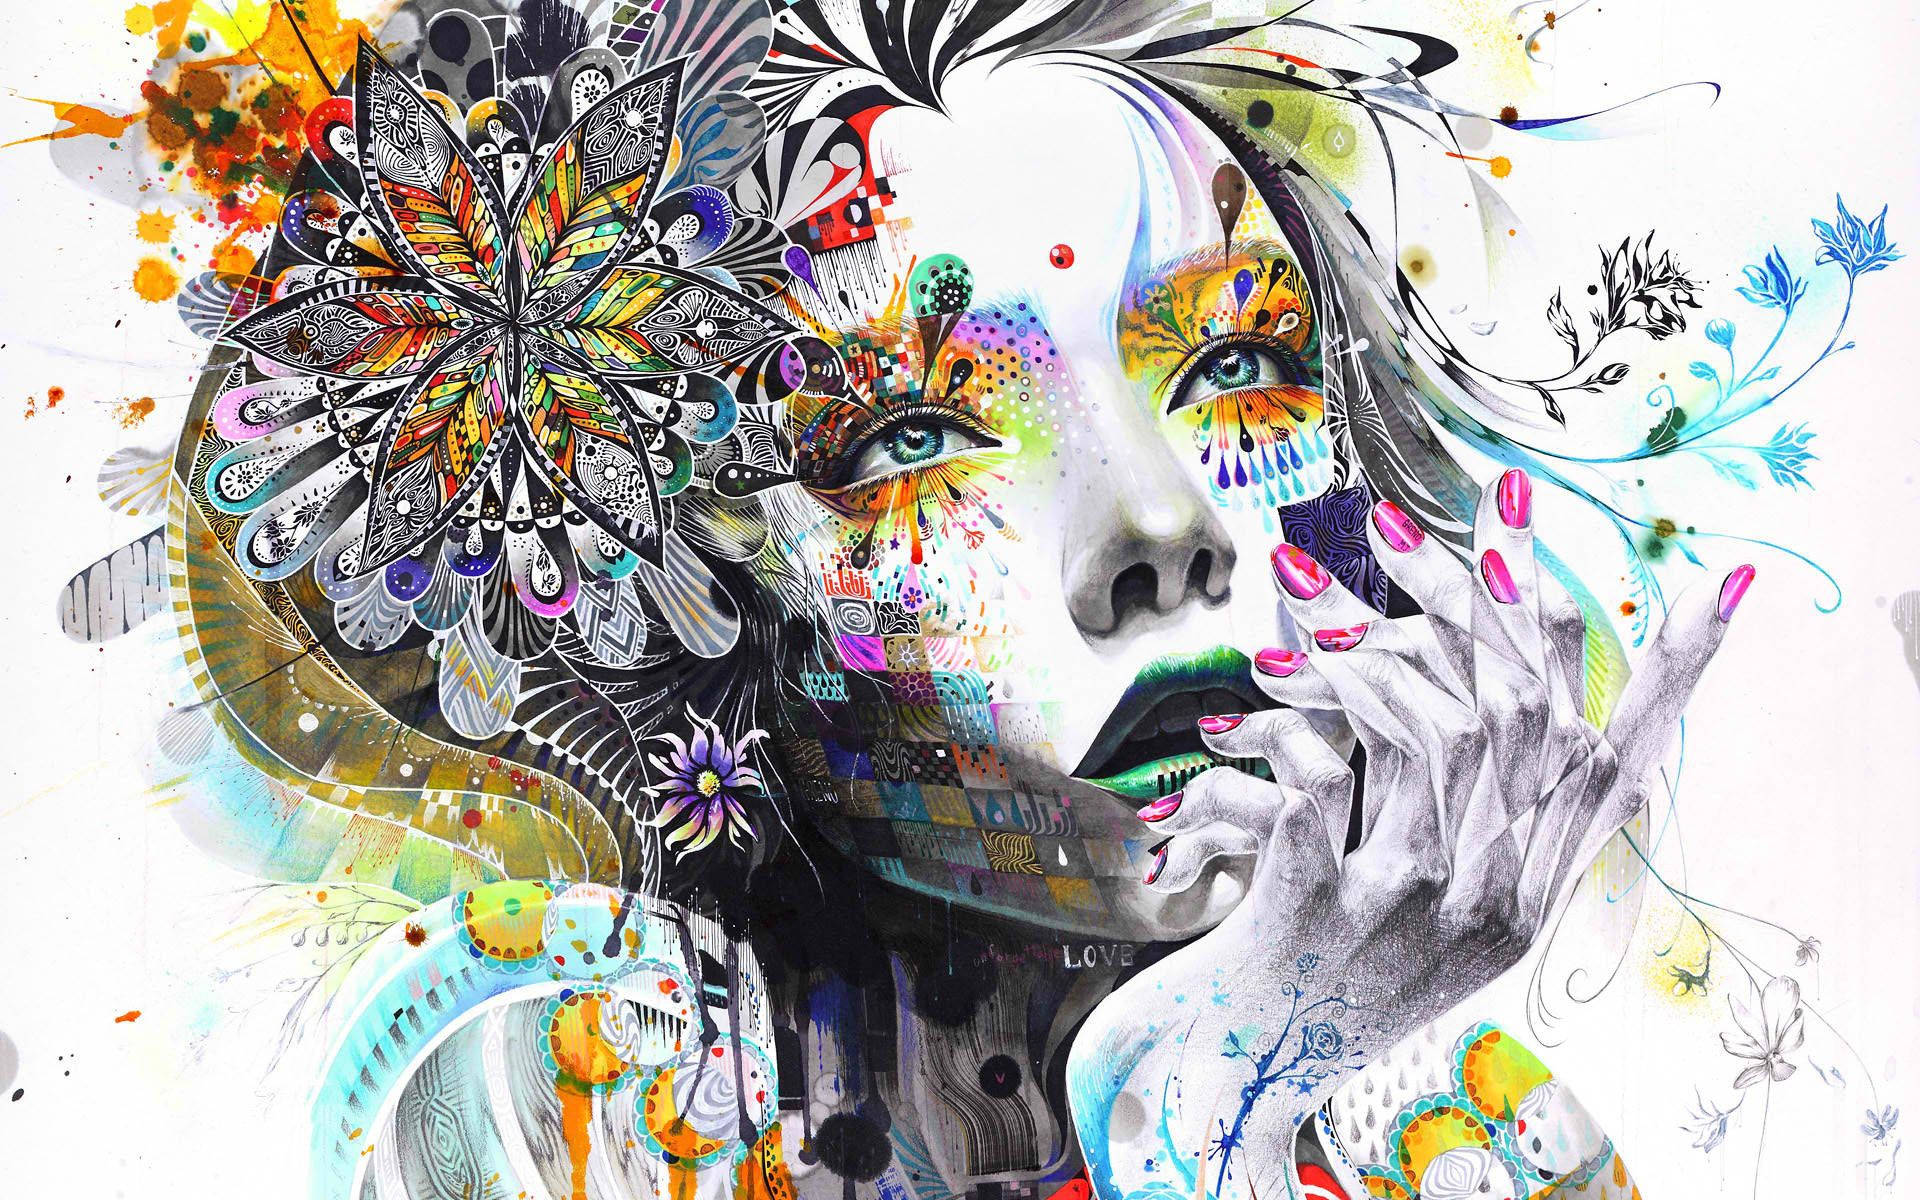 Vibrant colors take this psychedelic trippy face design to a new level Wallpaper